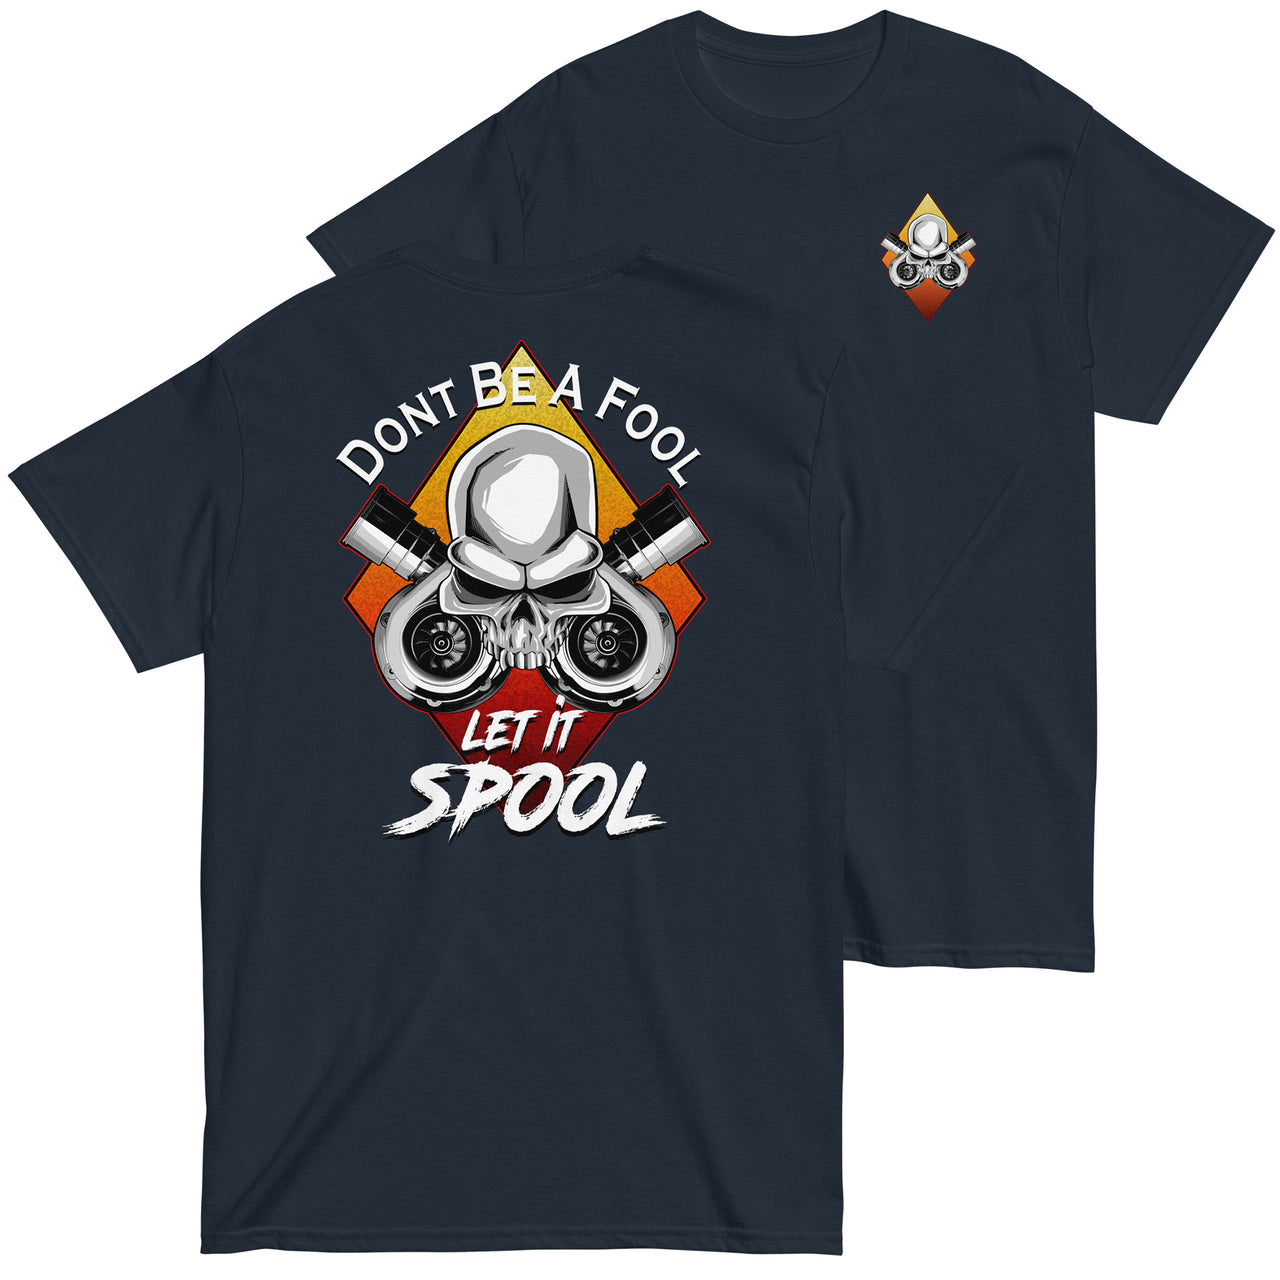 Dont Be A Fool - Spool Turbo T-Shirt in navy